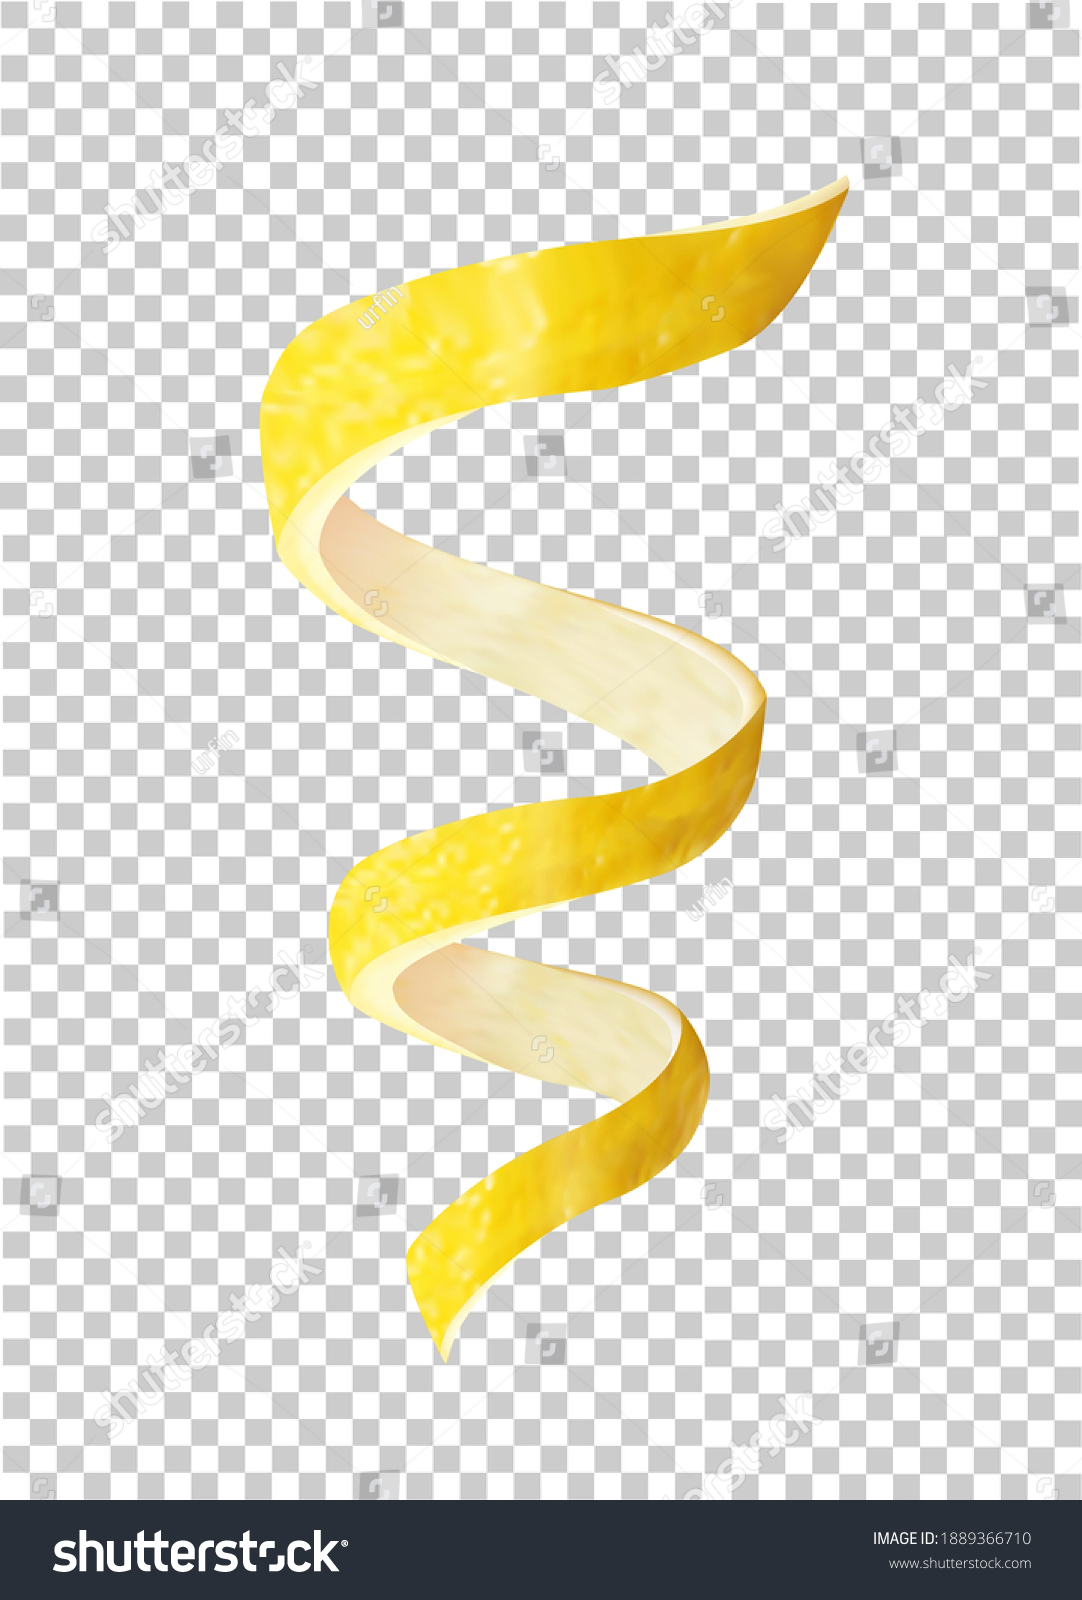 lemon peel in the form of a spiral vertically on a transparent background. vector illustration #1889366710